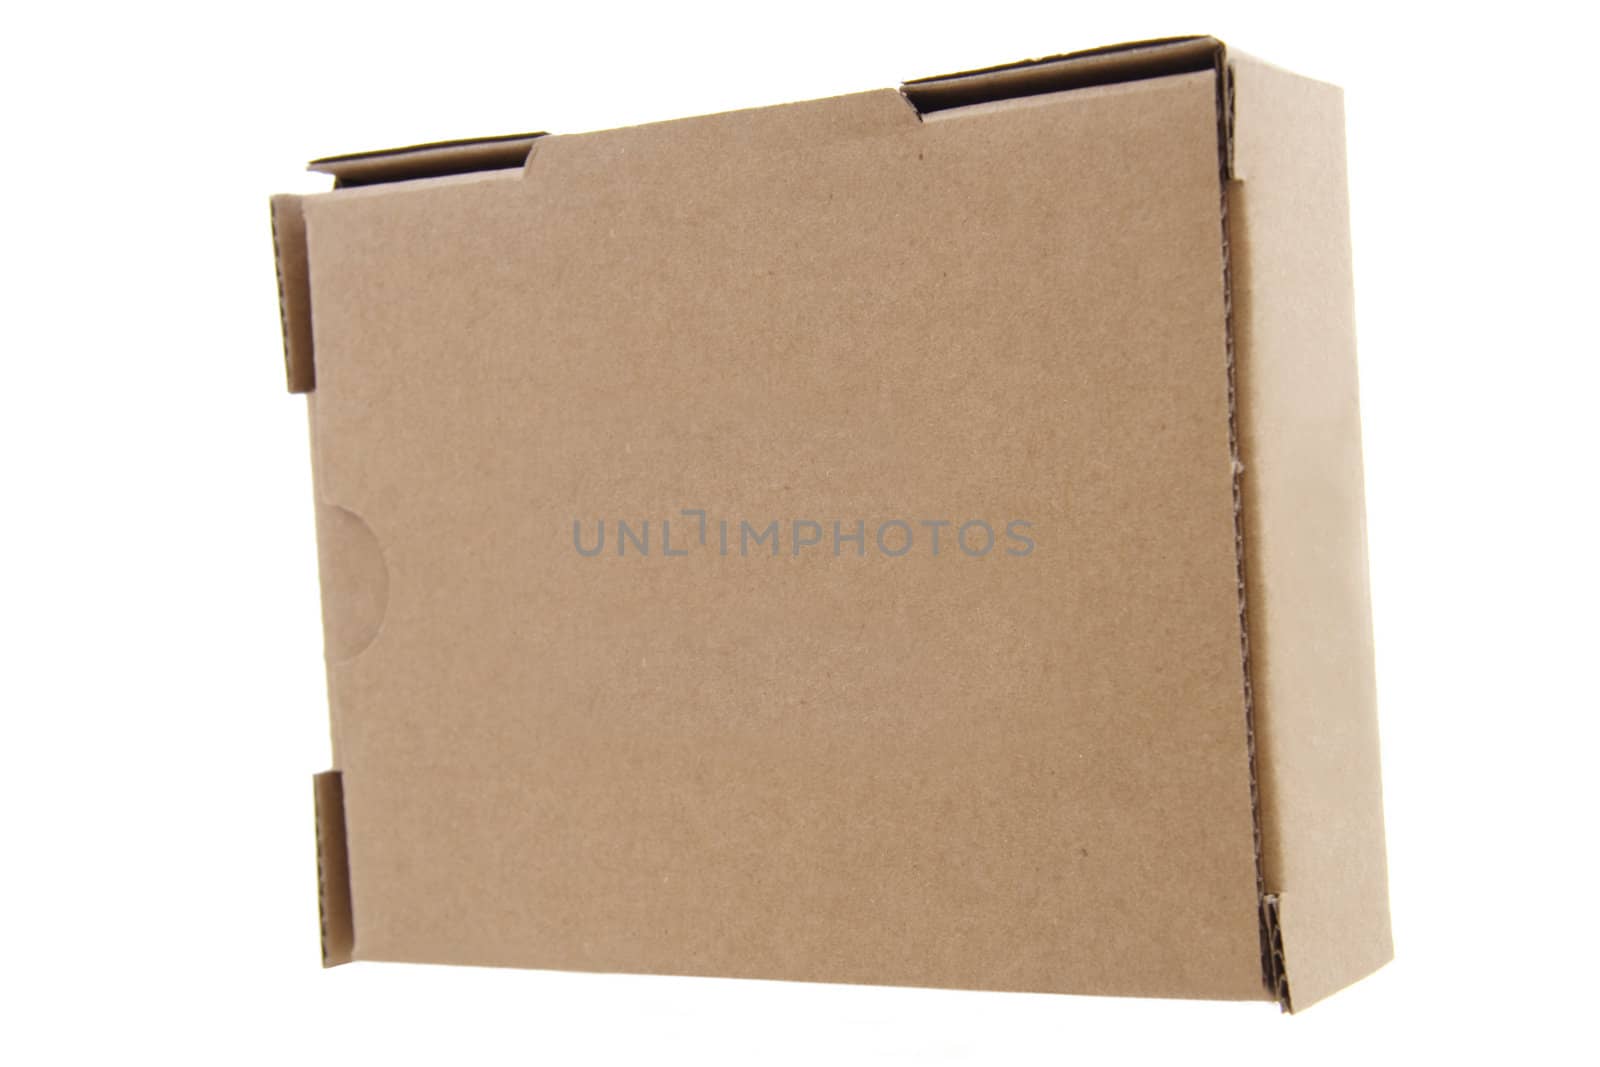 brown cardboard box strong packaging for sending items through the post